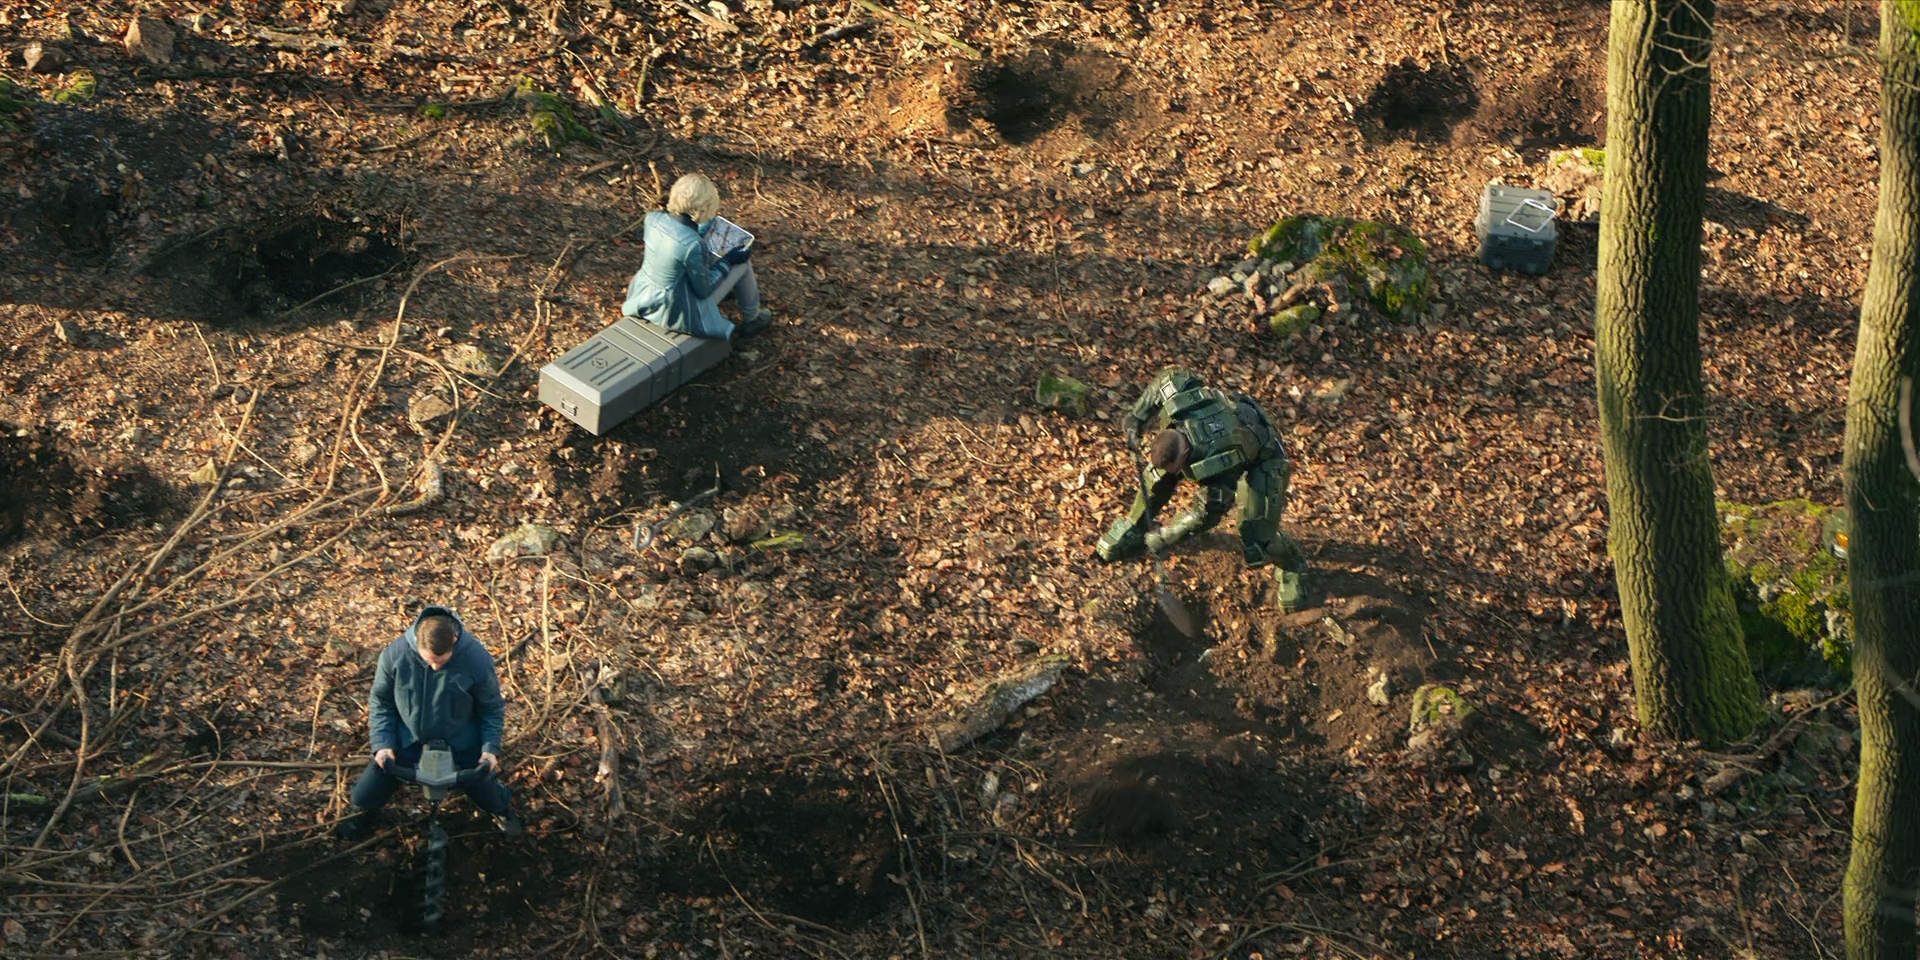 A forest floor. Halsey sits on a crate looking at a tablet computer. Adun squats while using a drilling tool. The Master Chief, with his helmet off, digs with a spade.